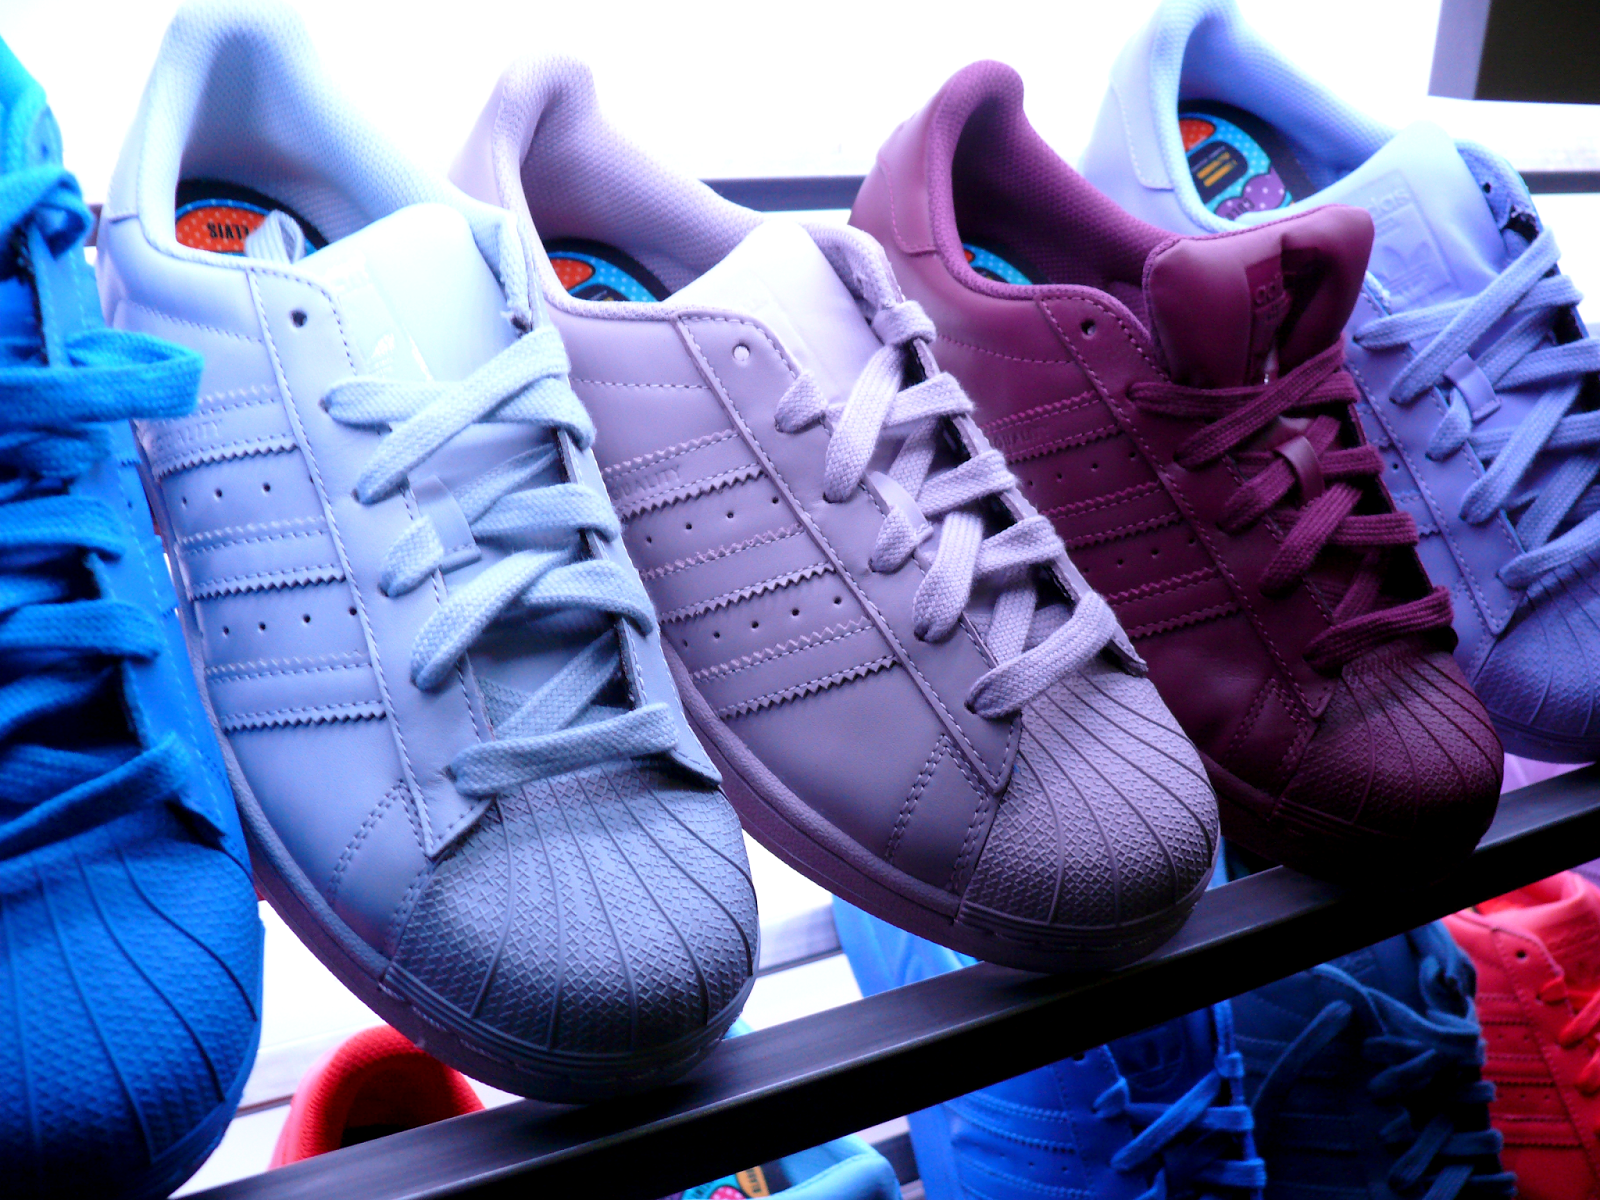 Event Adidas Originals Superstar Supercolor Collection designed by Pharrell Williams